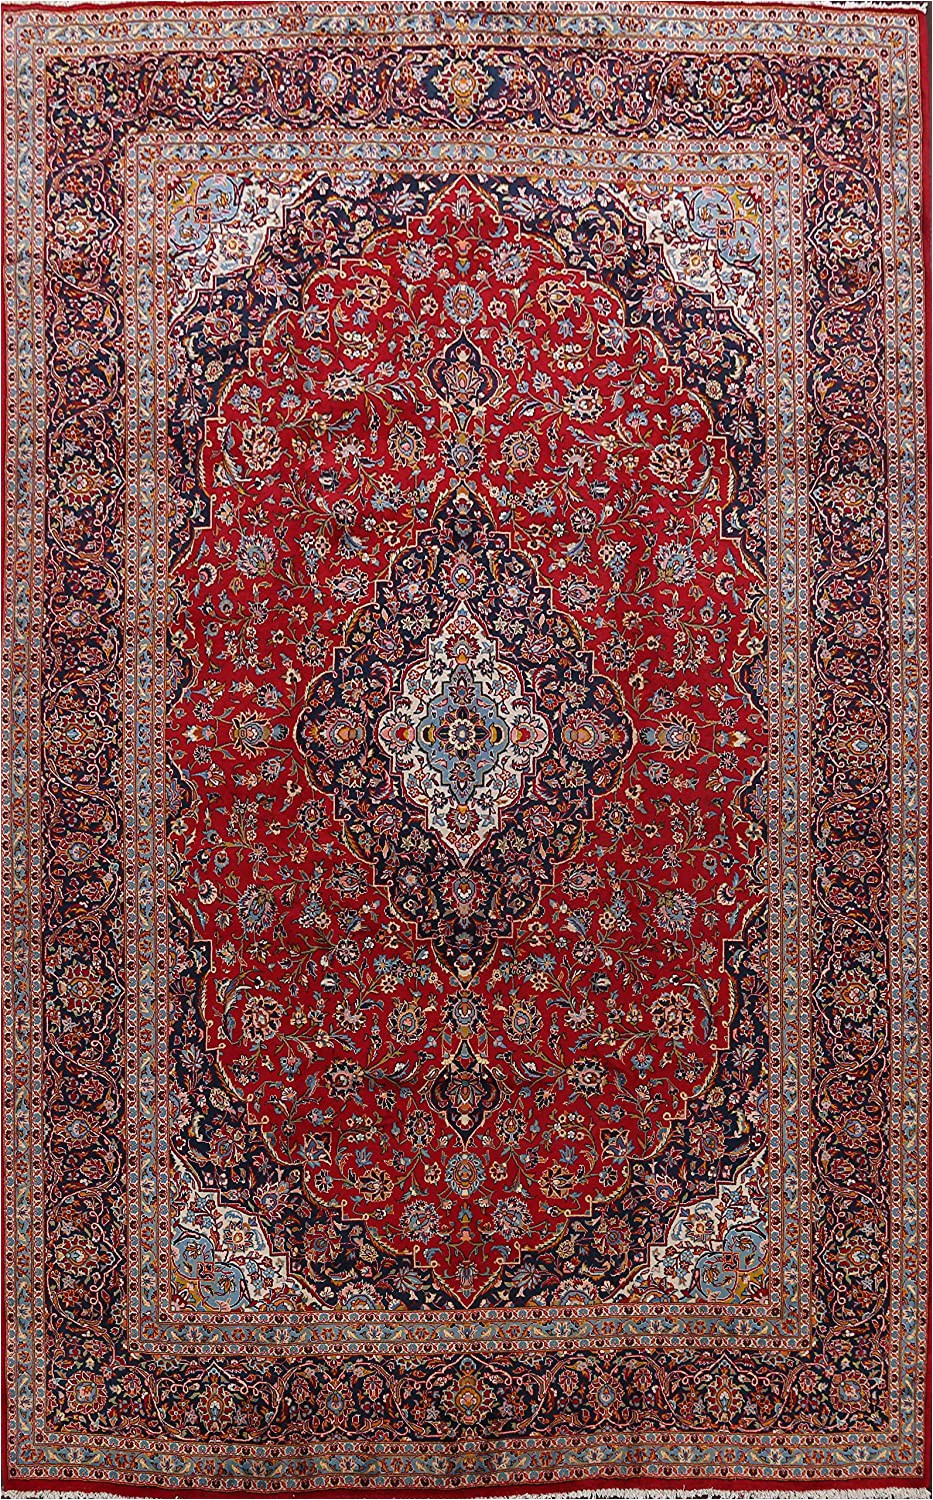 7 X 13 area Rug Amazon Floral Traditional Red Wool area Rug oriental